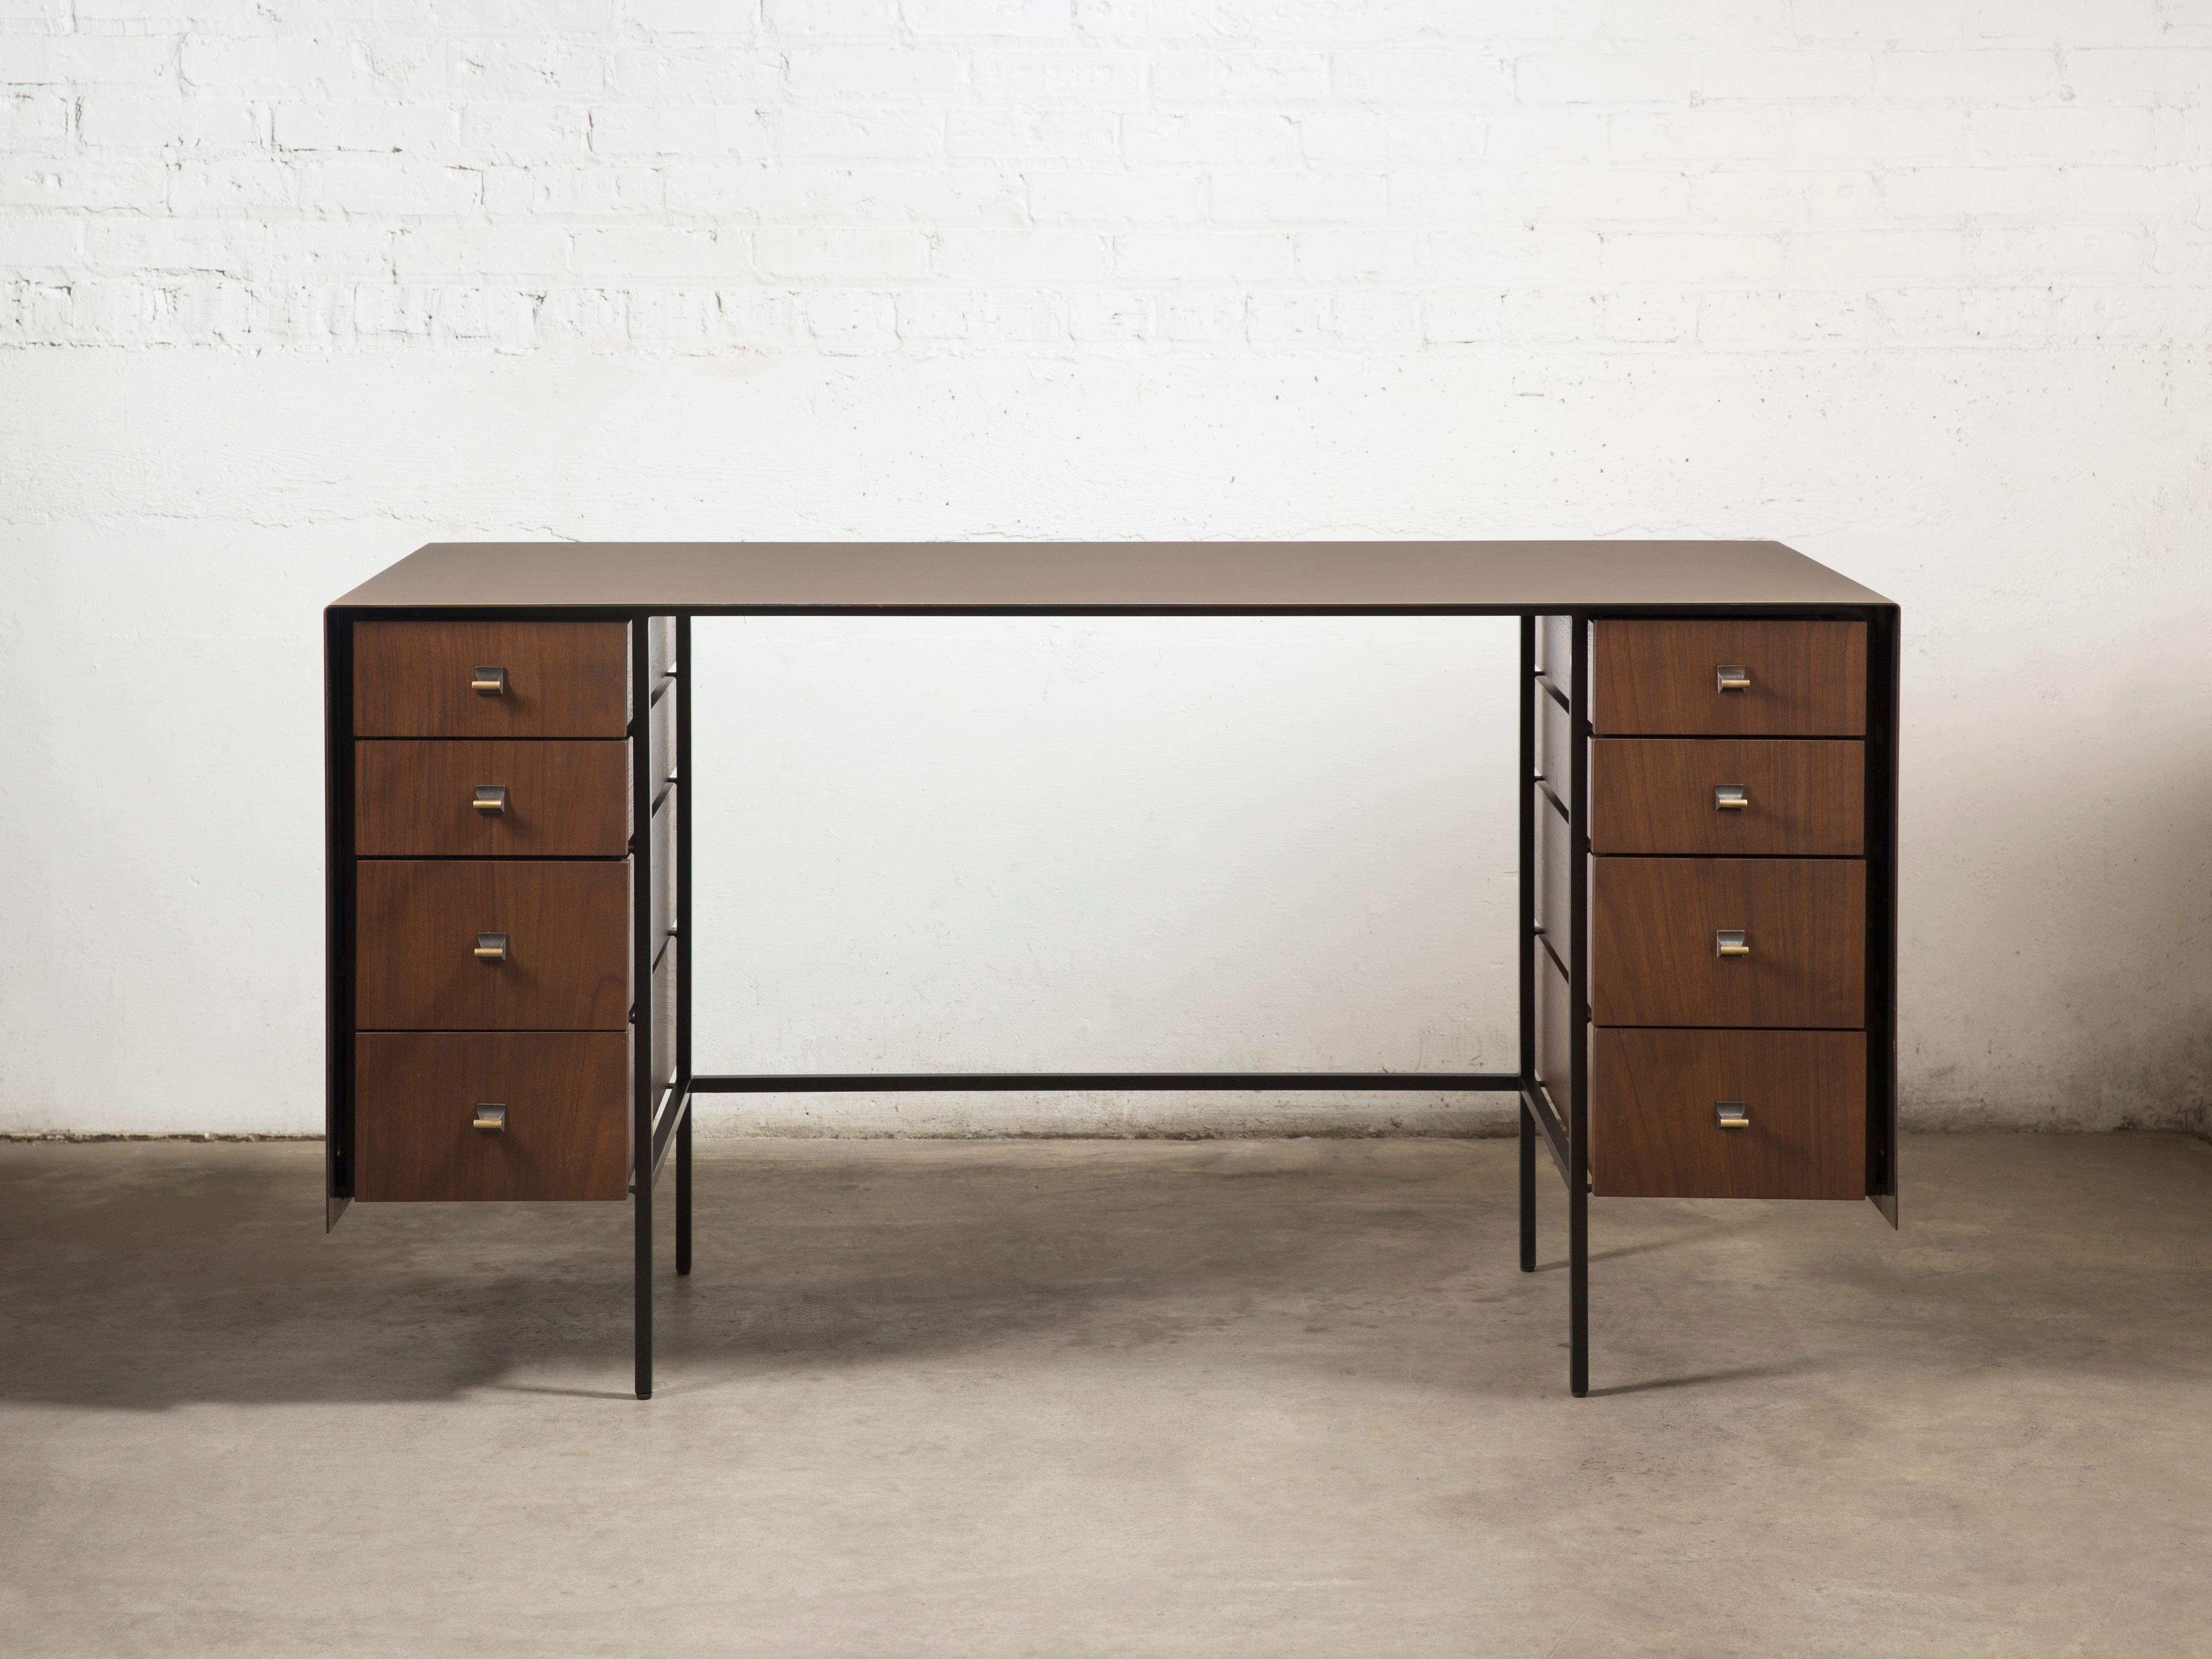 Bent desk by Gentner Design
Dimensions: D 147 x W 63.5 x H 76 cm
Materials: bronze, walnut wood

A single metal sheet is bent creating the surface and sides, aptly giving the desk its name. The finish is darkened by hand through a proprietary